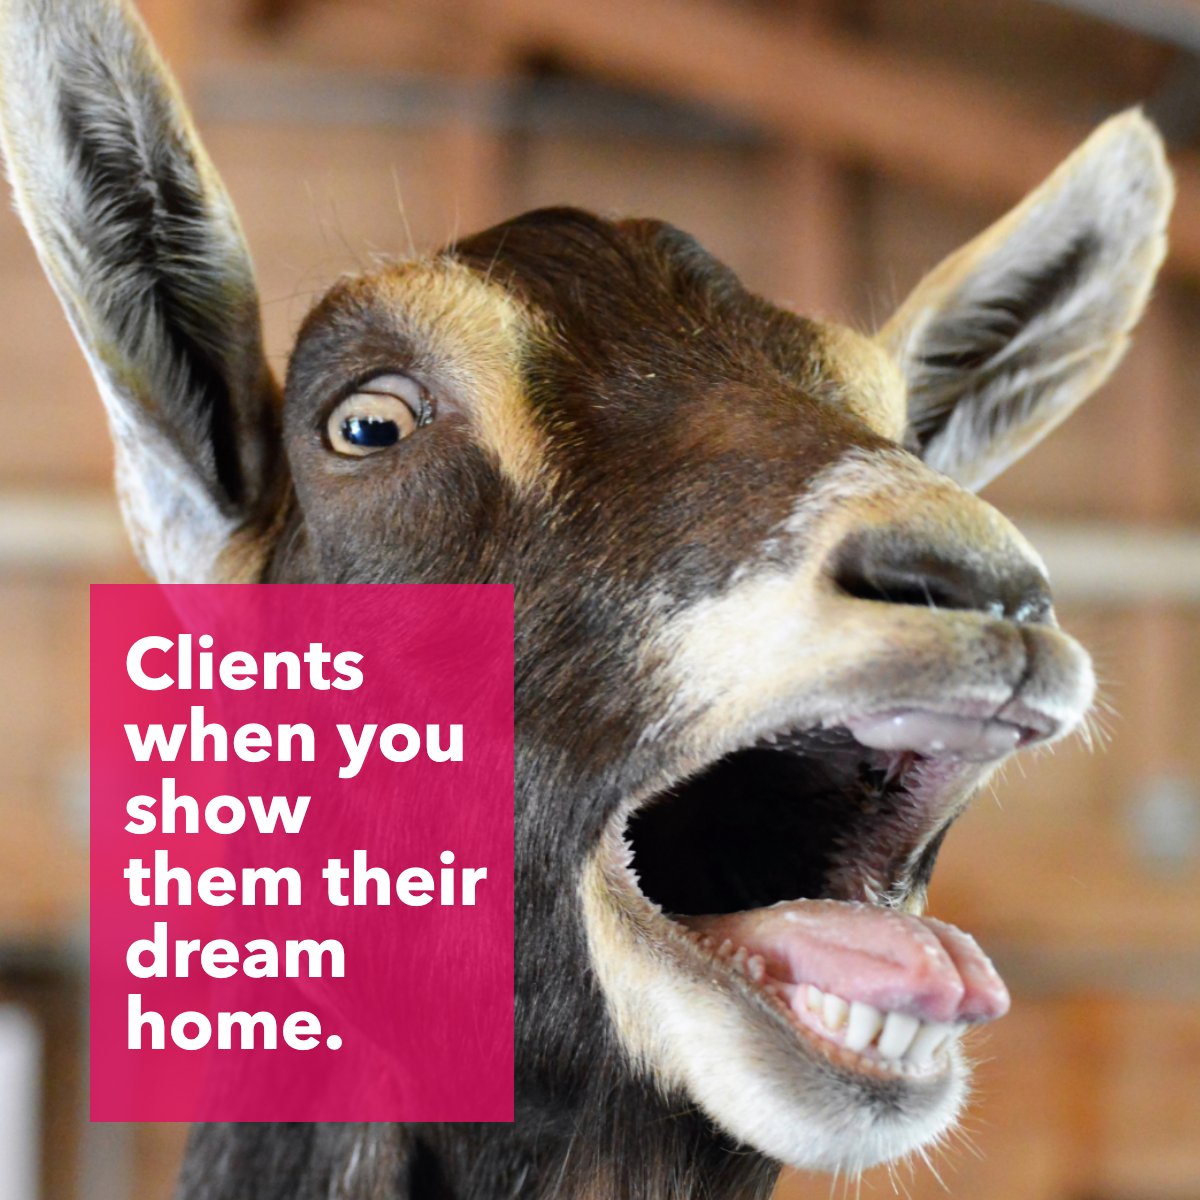 Showing a client their dream home is an exciting moment for everyone. 👌

What does your dream home look like? 🏡 

#clients    #dreamhome    #showing    #agent    #buyers    #goat
#schy #schyrealtor #Realestateinvesting #fresno #fresnorealestate #buyrealestate